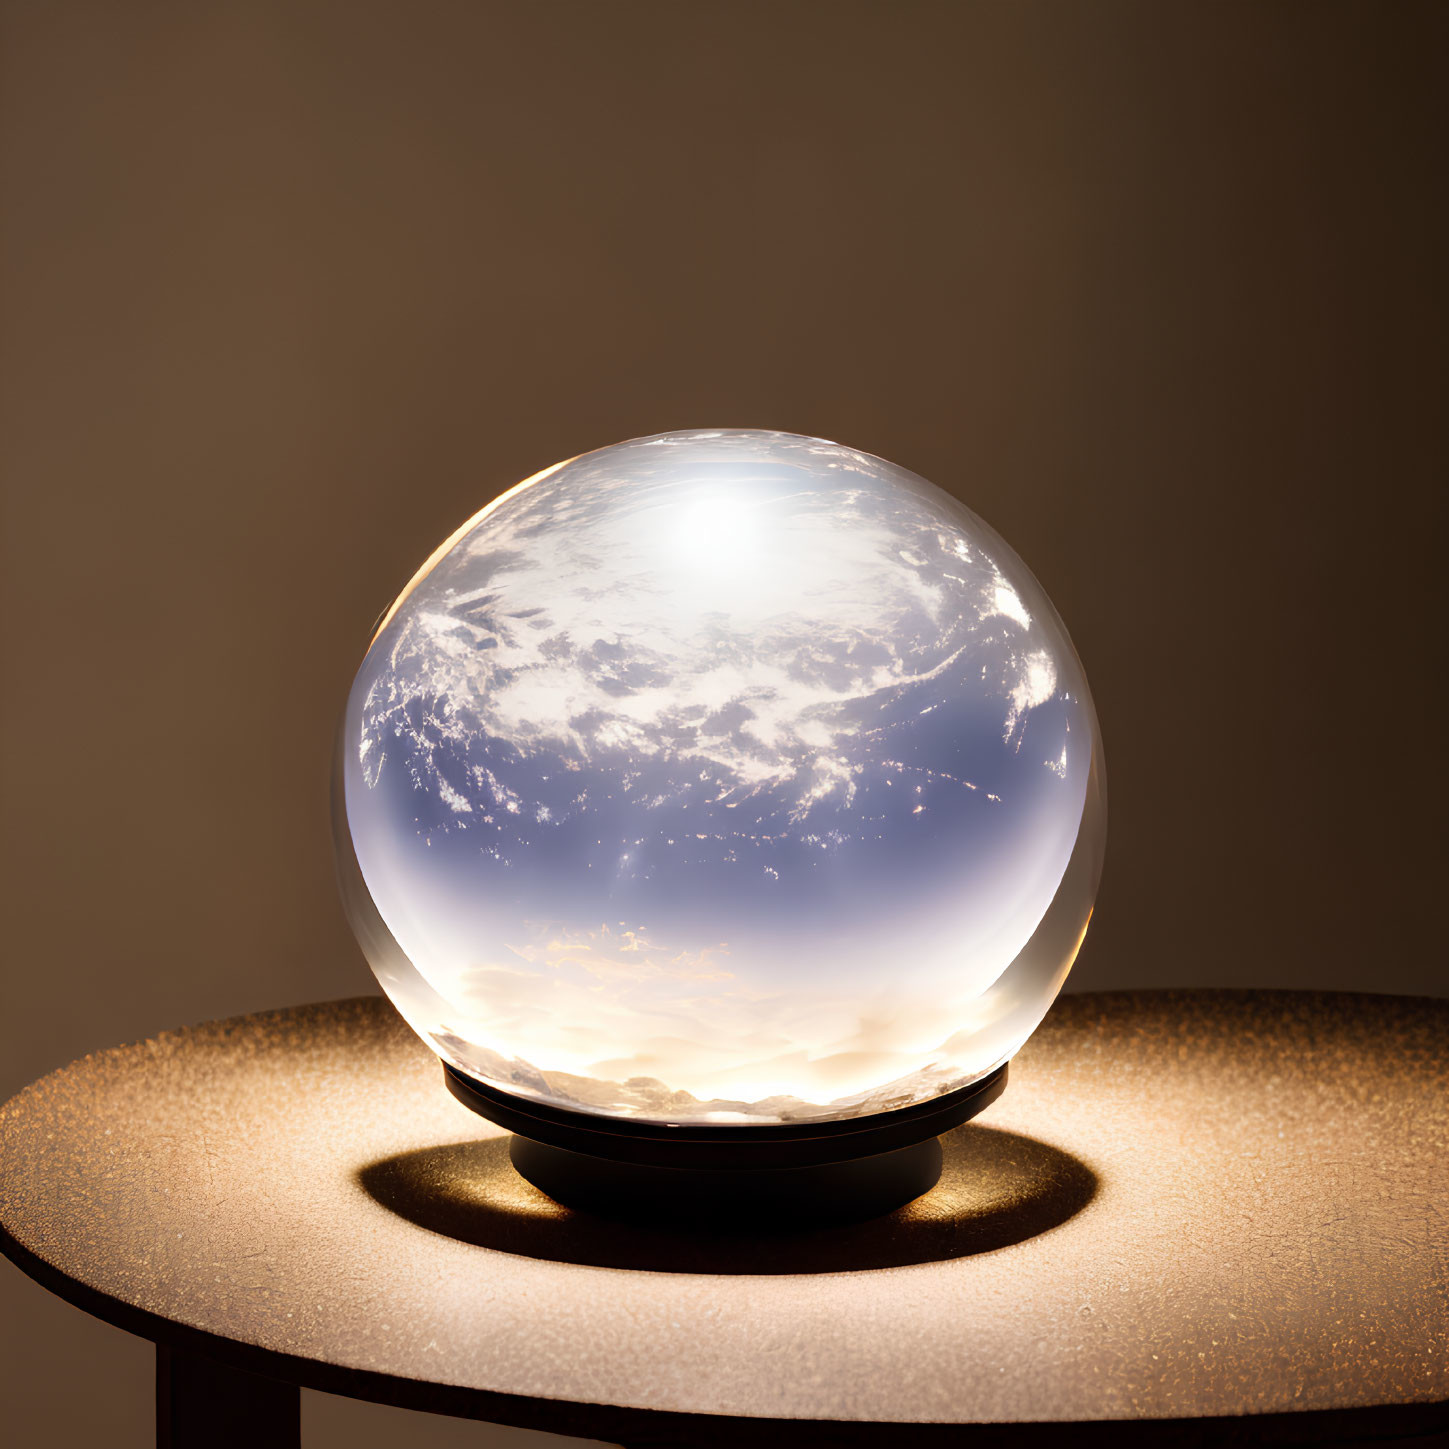 Translucent globe with illuminated clouds and continents on table